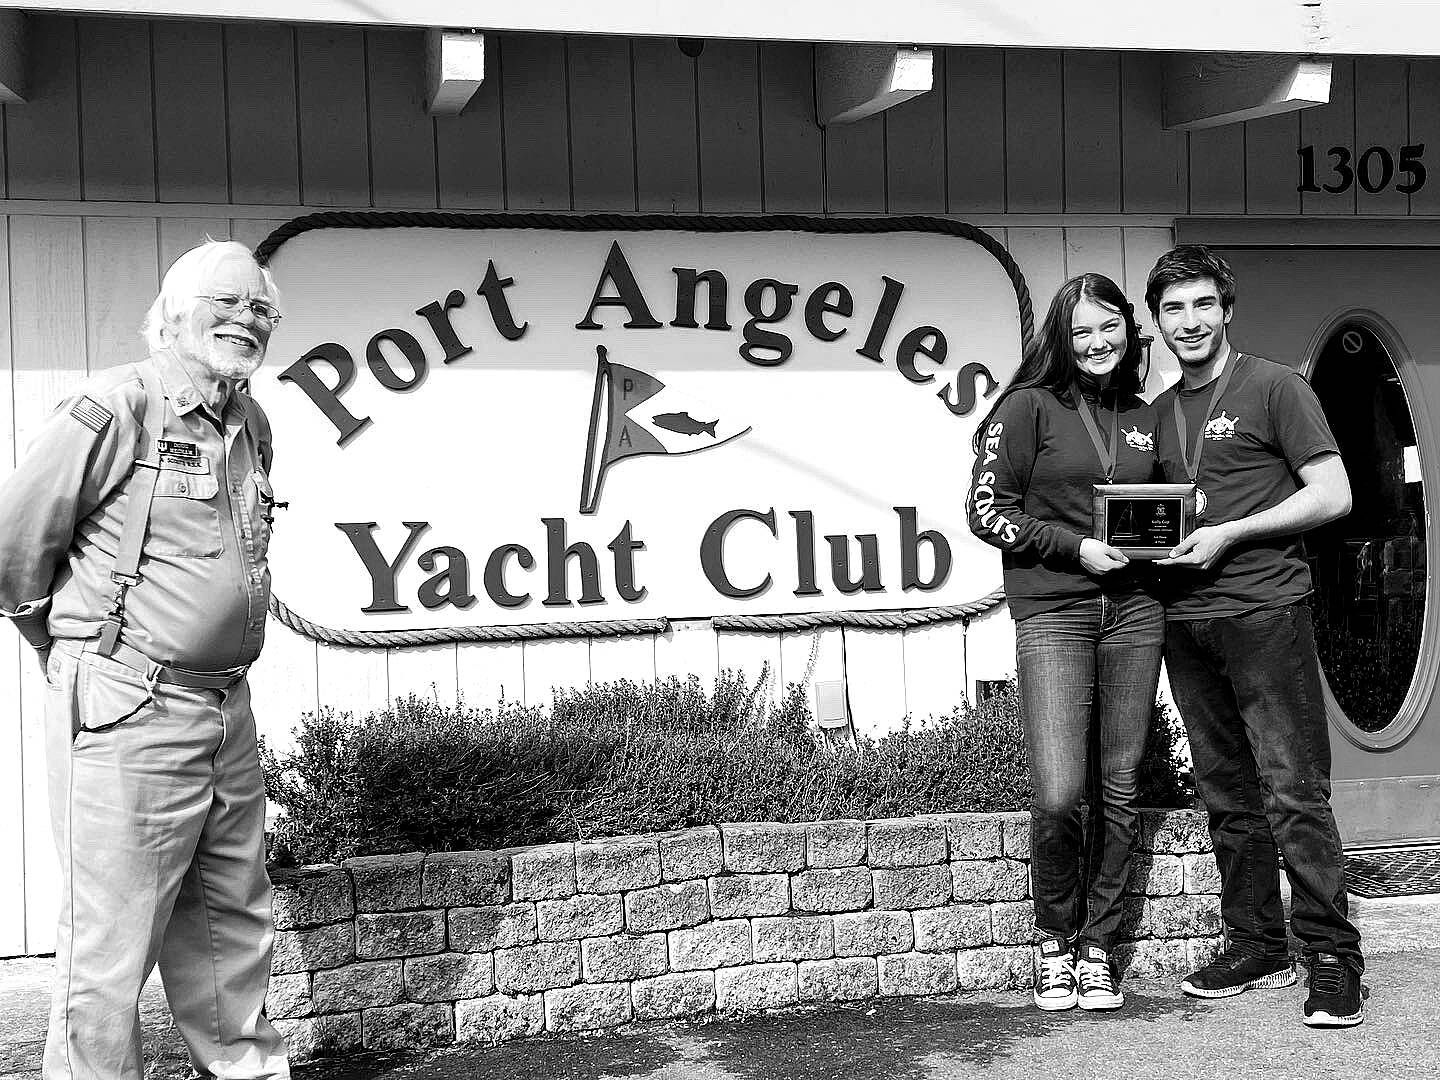 Submitted photo 
Sailors Ella Schultz, middle, and Ozzy Minard earned a first-place finish in the first Kelly Cup Regatta hosted by the Sea Scout Ship Marvin Shields and the Port Angeles Yacht Club, represented by Doug Mecham.